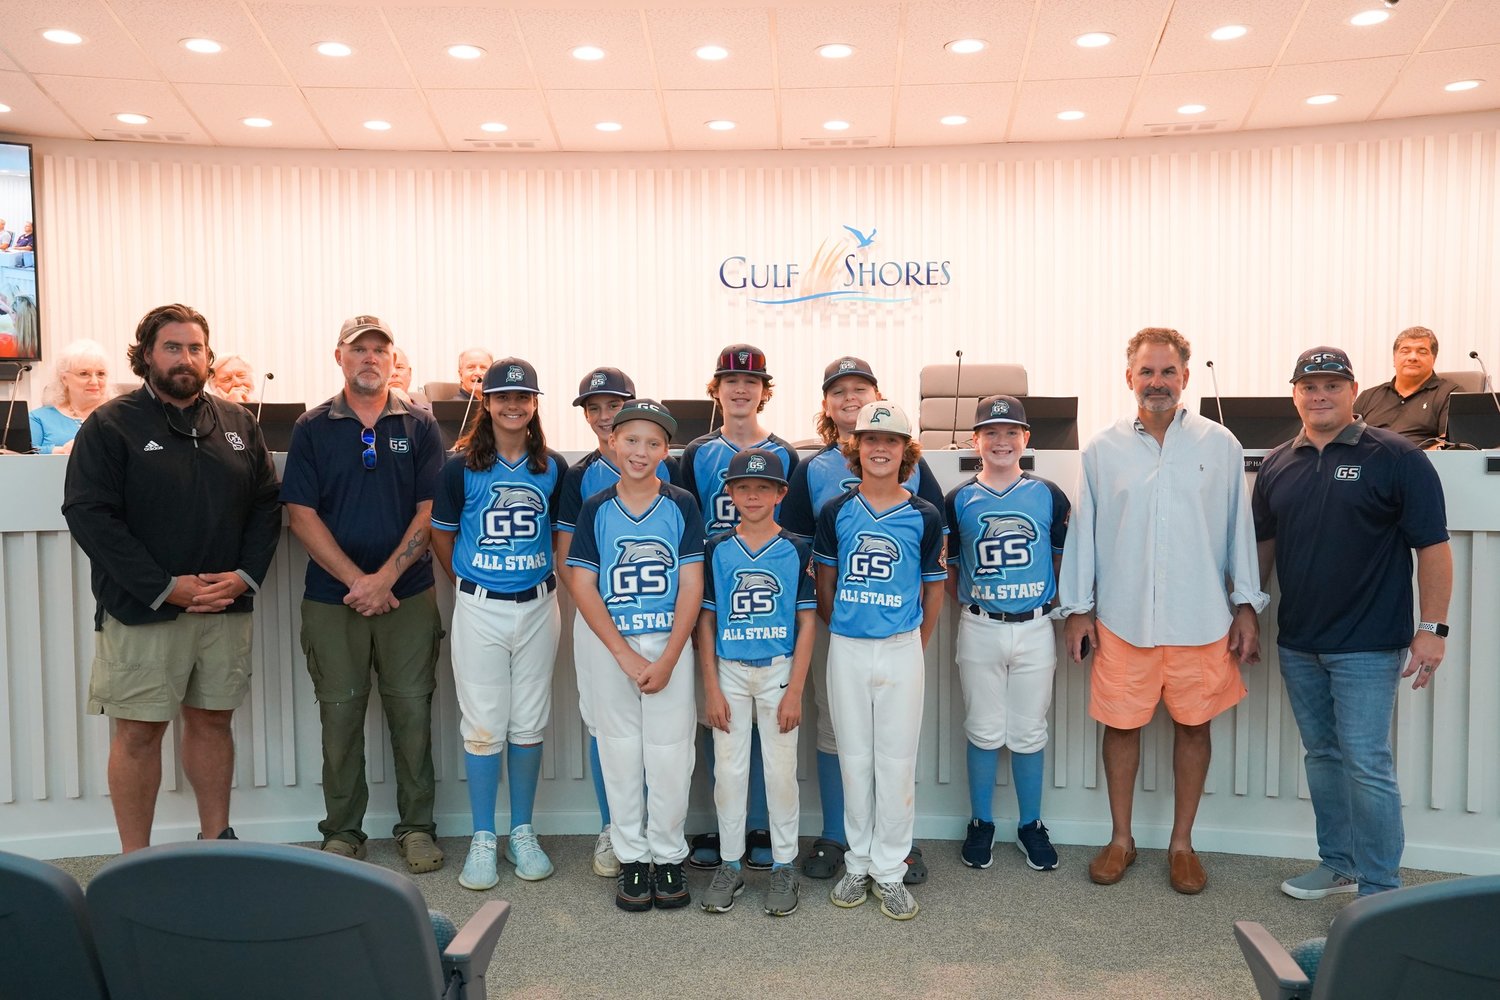 Many members from Gulf Shores’ 12u team found the end of the road in their rec league careers after their season ended in the all-star state tournament in Andalusia.